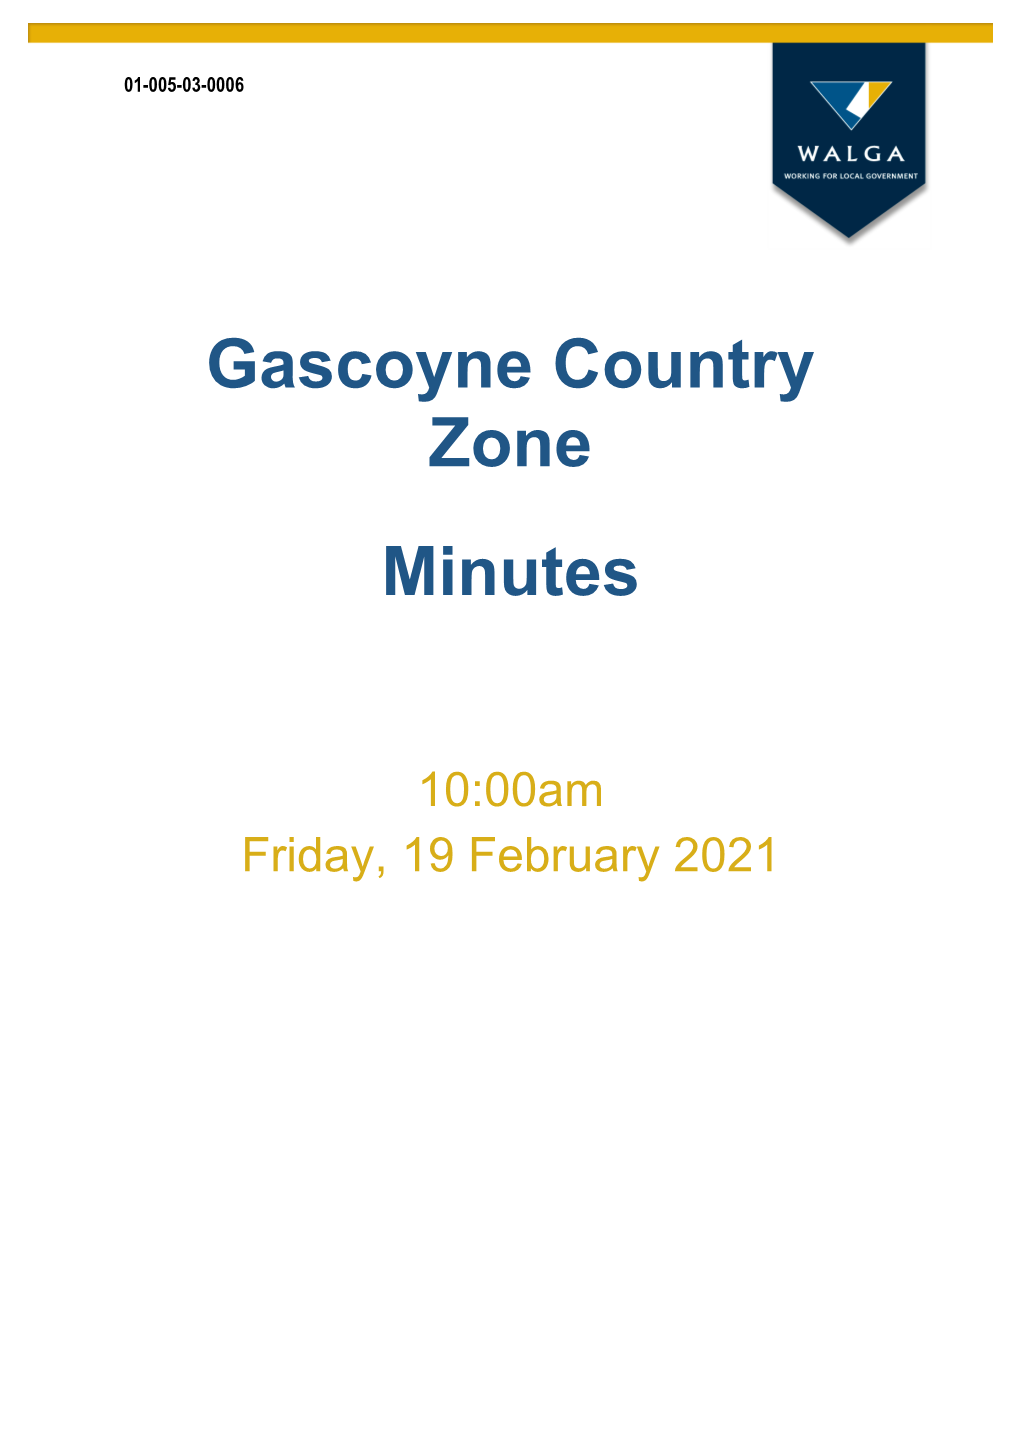 Gascoyne Country Zone Minutes